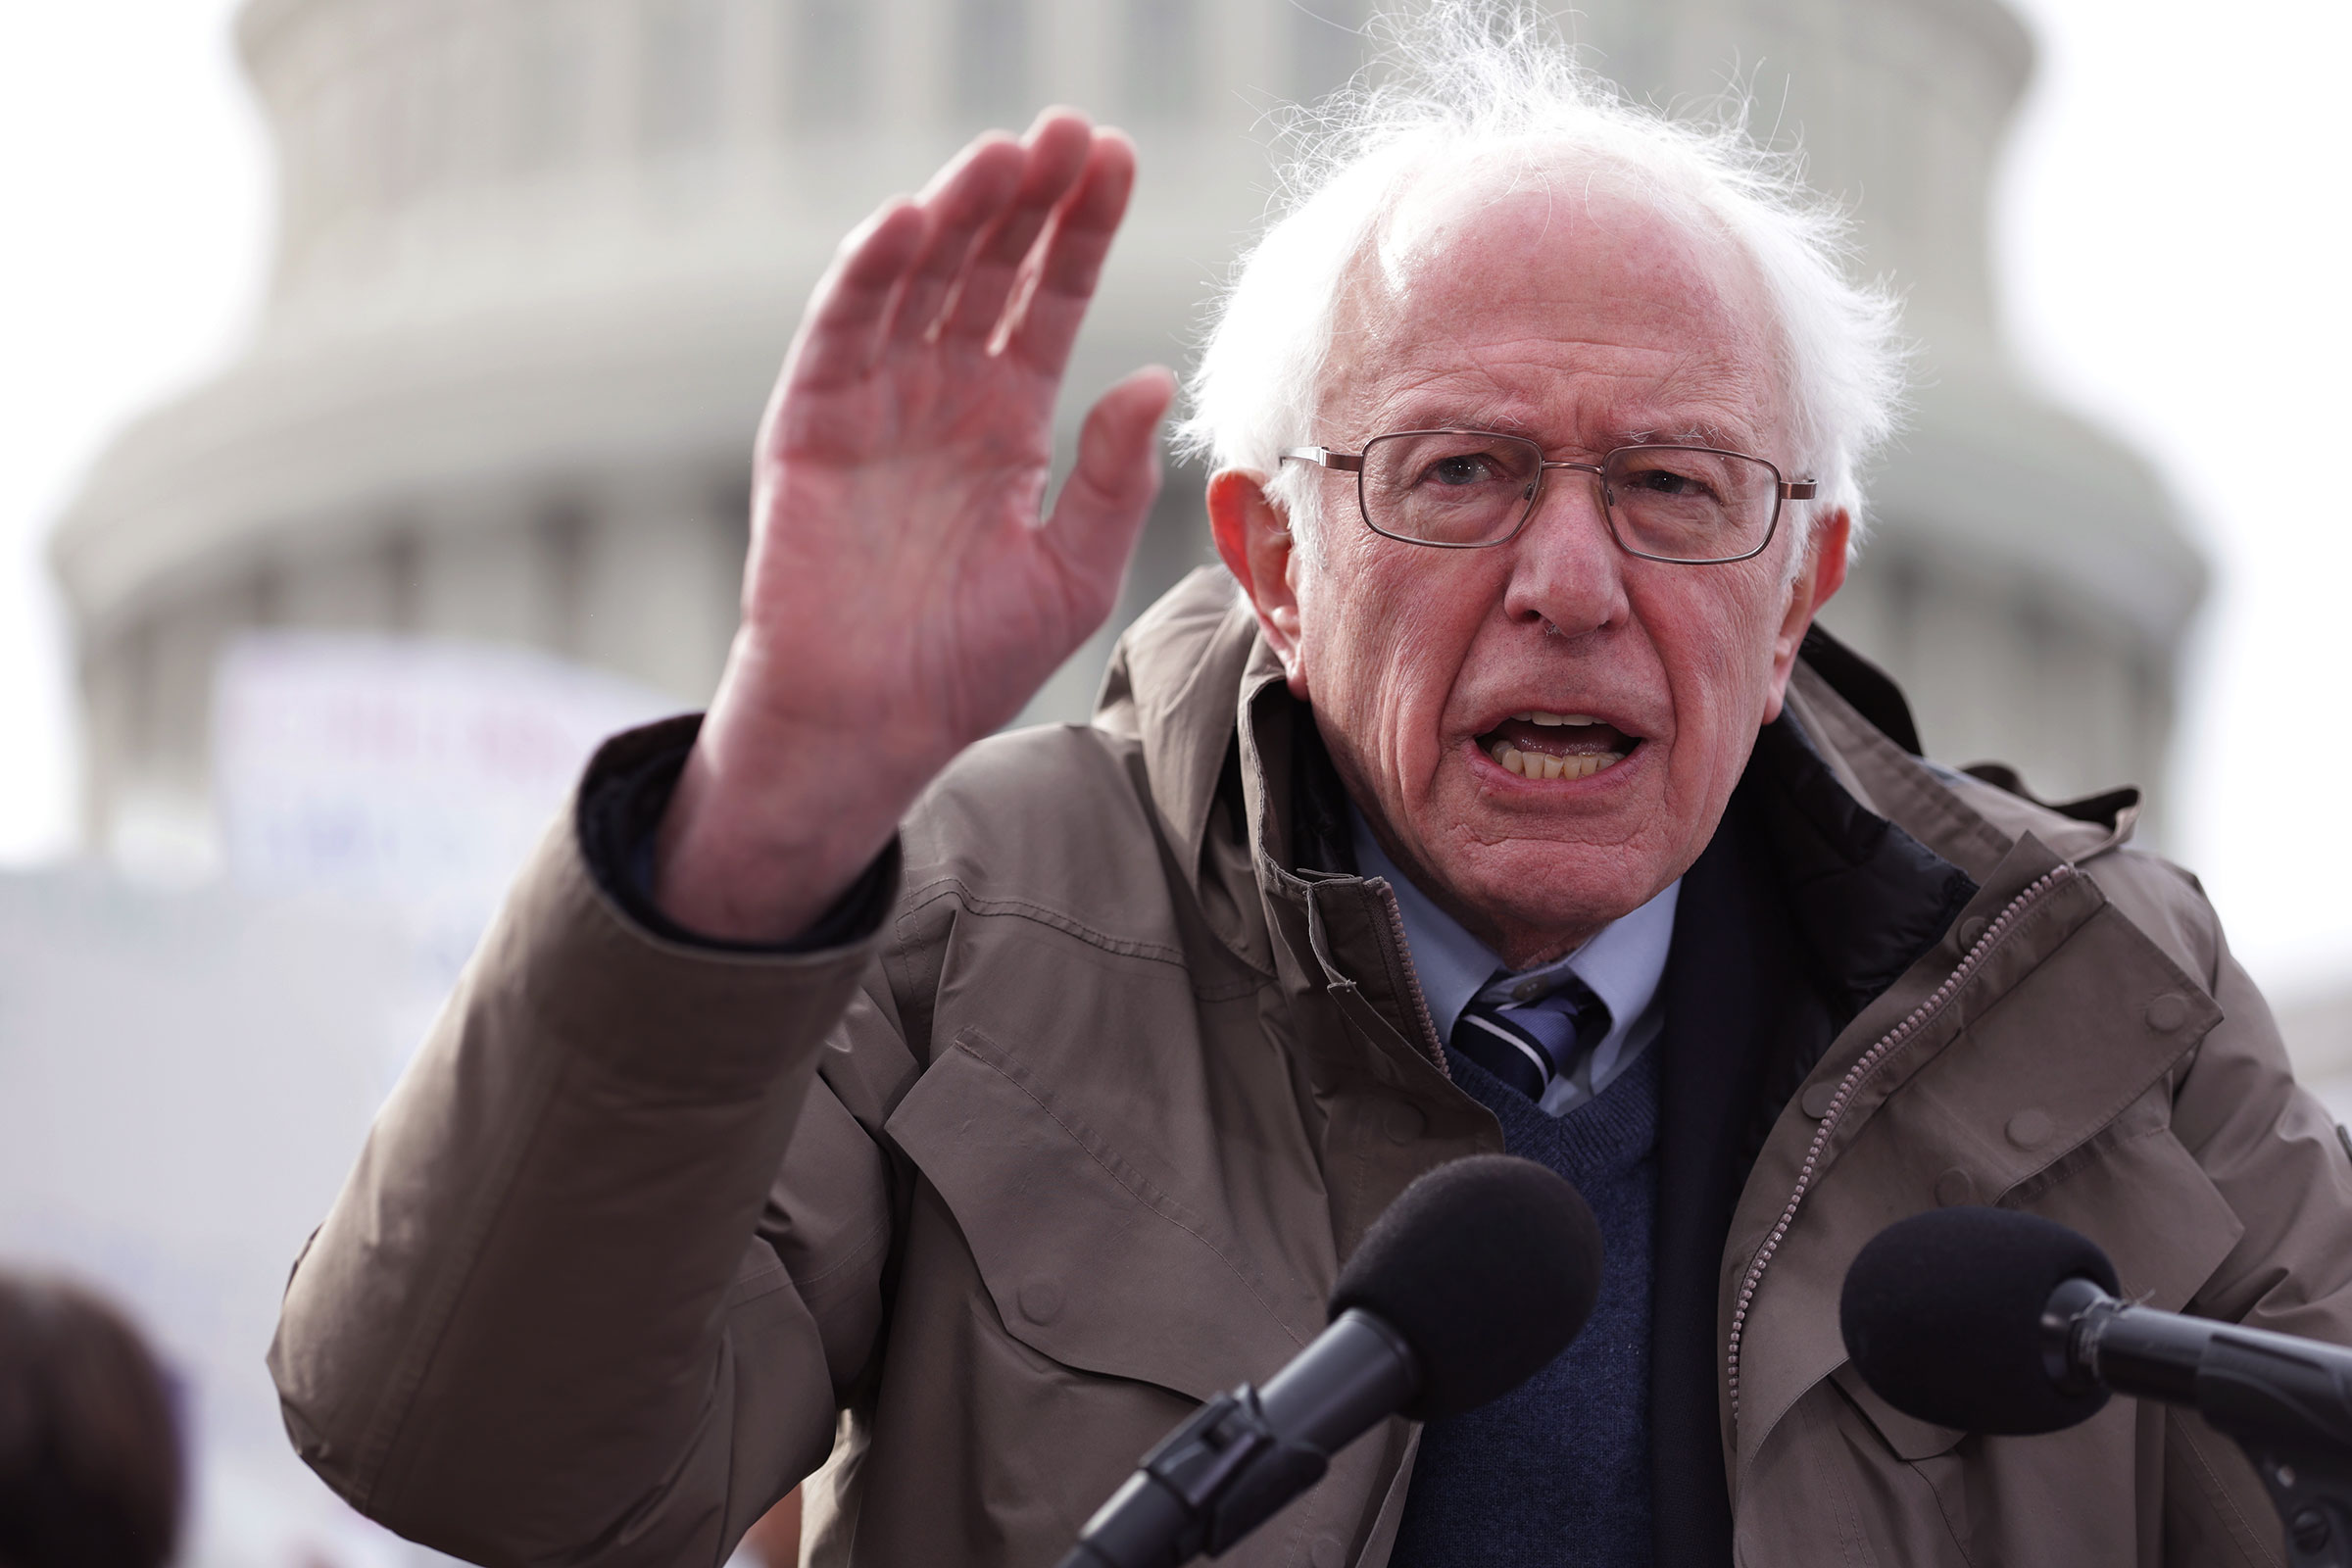 Bernie Sanders gestures while speaking at a podium on the steps of the United States capitol